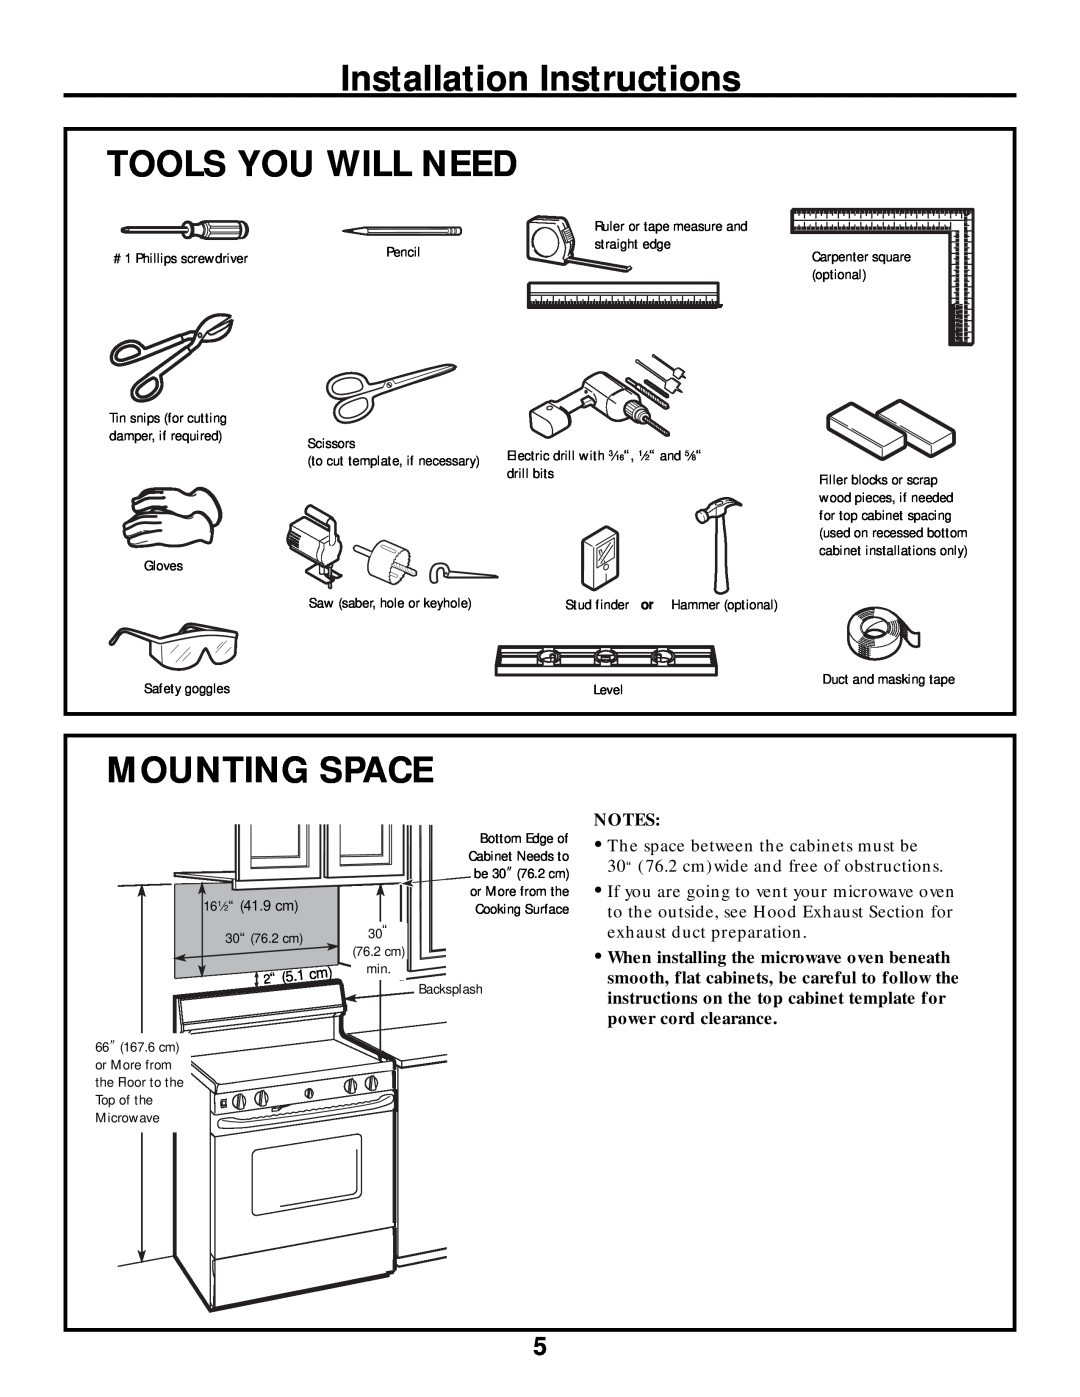 Frigidaire 316495063 Installation Instructions TOOLS YOU WILL NEED, Mounting Space, The space between the cabinets must be 